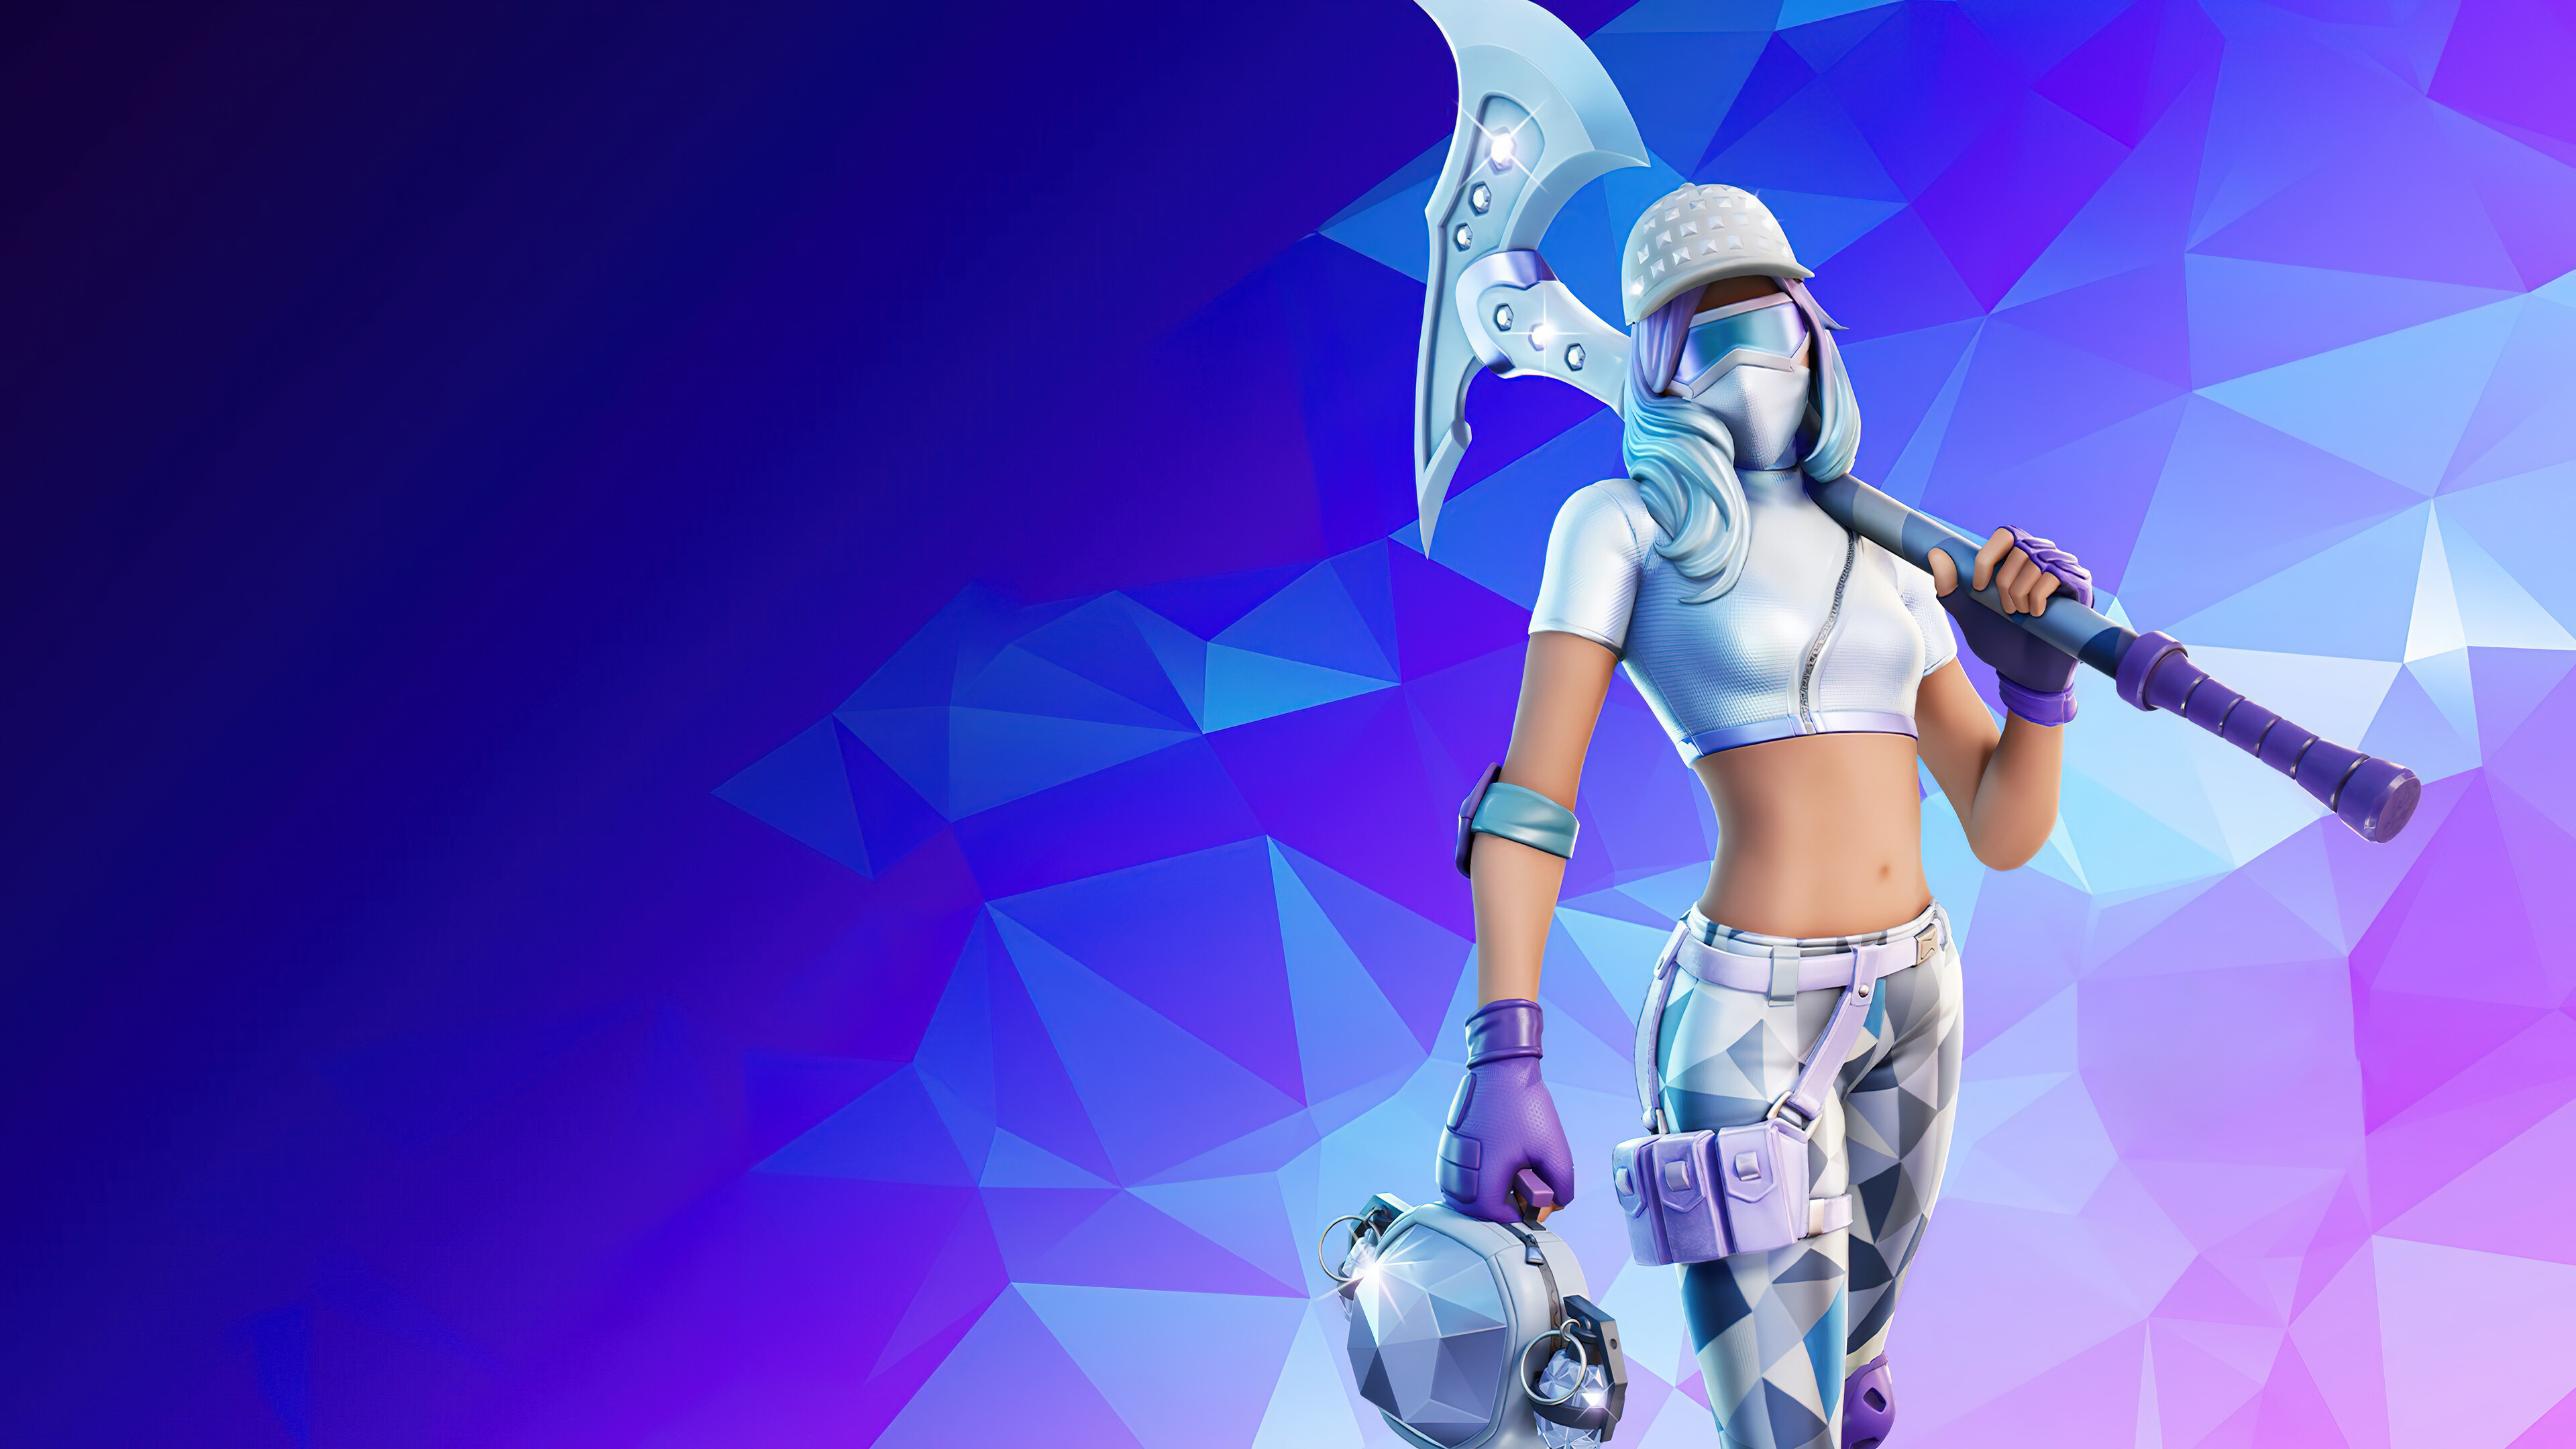 Fortnite: Diamond Diva, A Rare Starter Pack in Battle Royale that can be purchased from the in-game store. 3840x2160 4K Wallpaper.